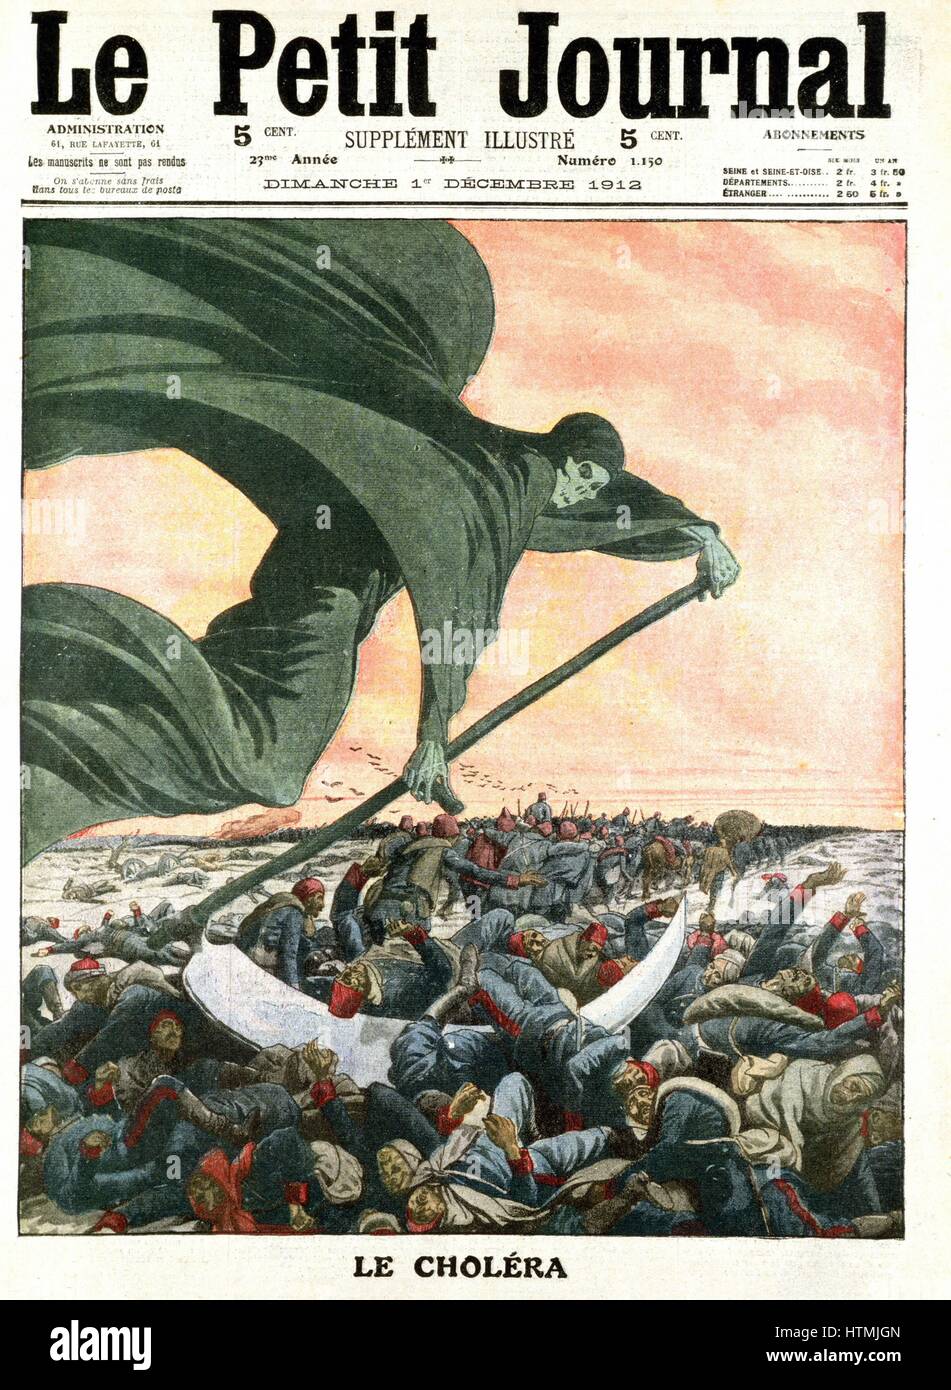 Death, the grim reaper. Turkish army defeated by Cholera, not enemy, approaching Luleburgaz in disorder: 100 deaths per day. Illustration from 'Le Petit Journal', Paris, 1 December 1912. First Balkan War 1912-13: Balkan League (Bulgaria, Serbia, Greece, Montenegro) against Turkey. Stock Photo